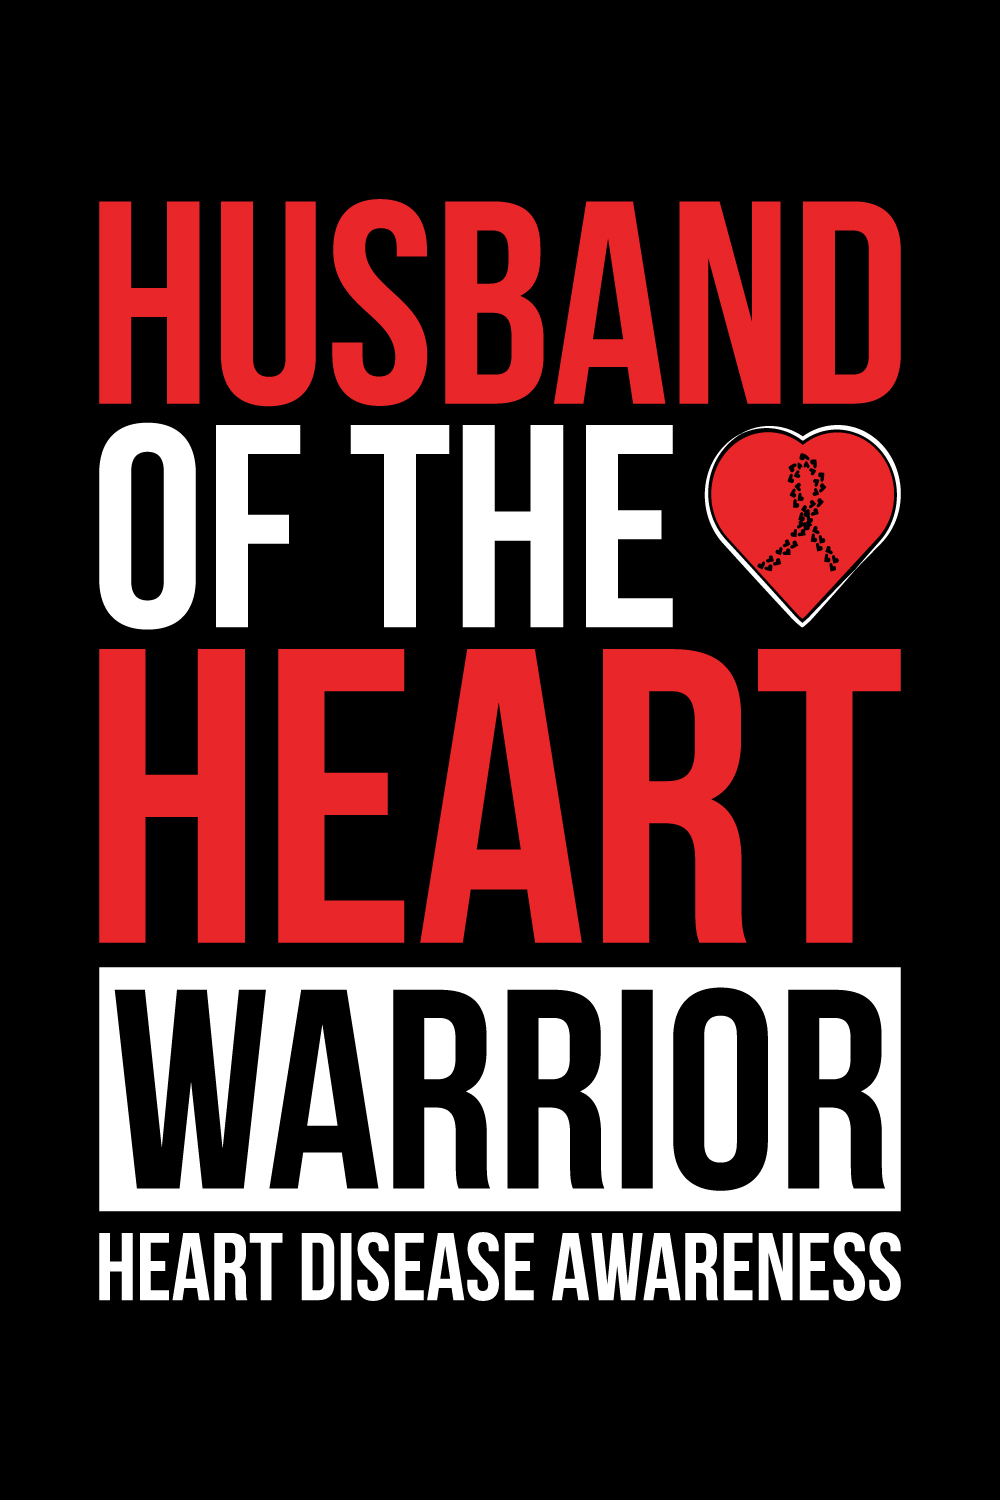 Husband of the Heart Warrior Heart Disease Awareness illustrations for print-ready T-Shirts design pinterest preview image.